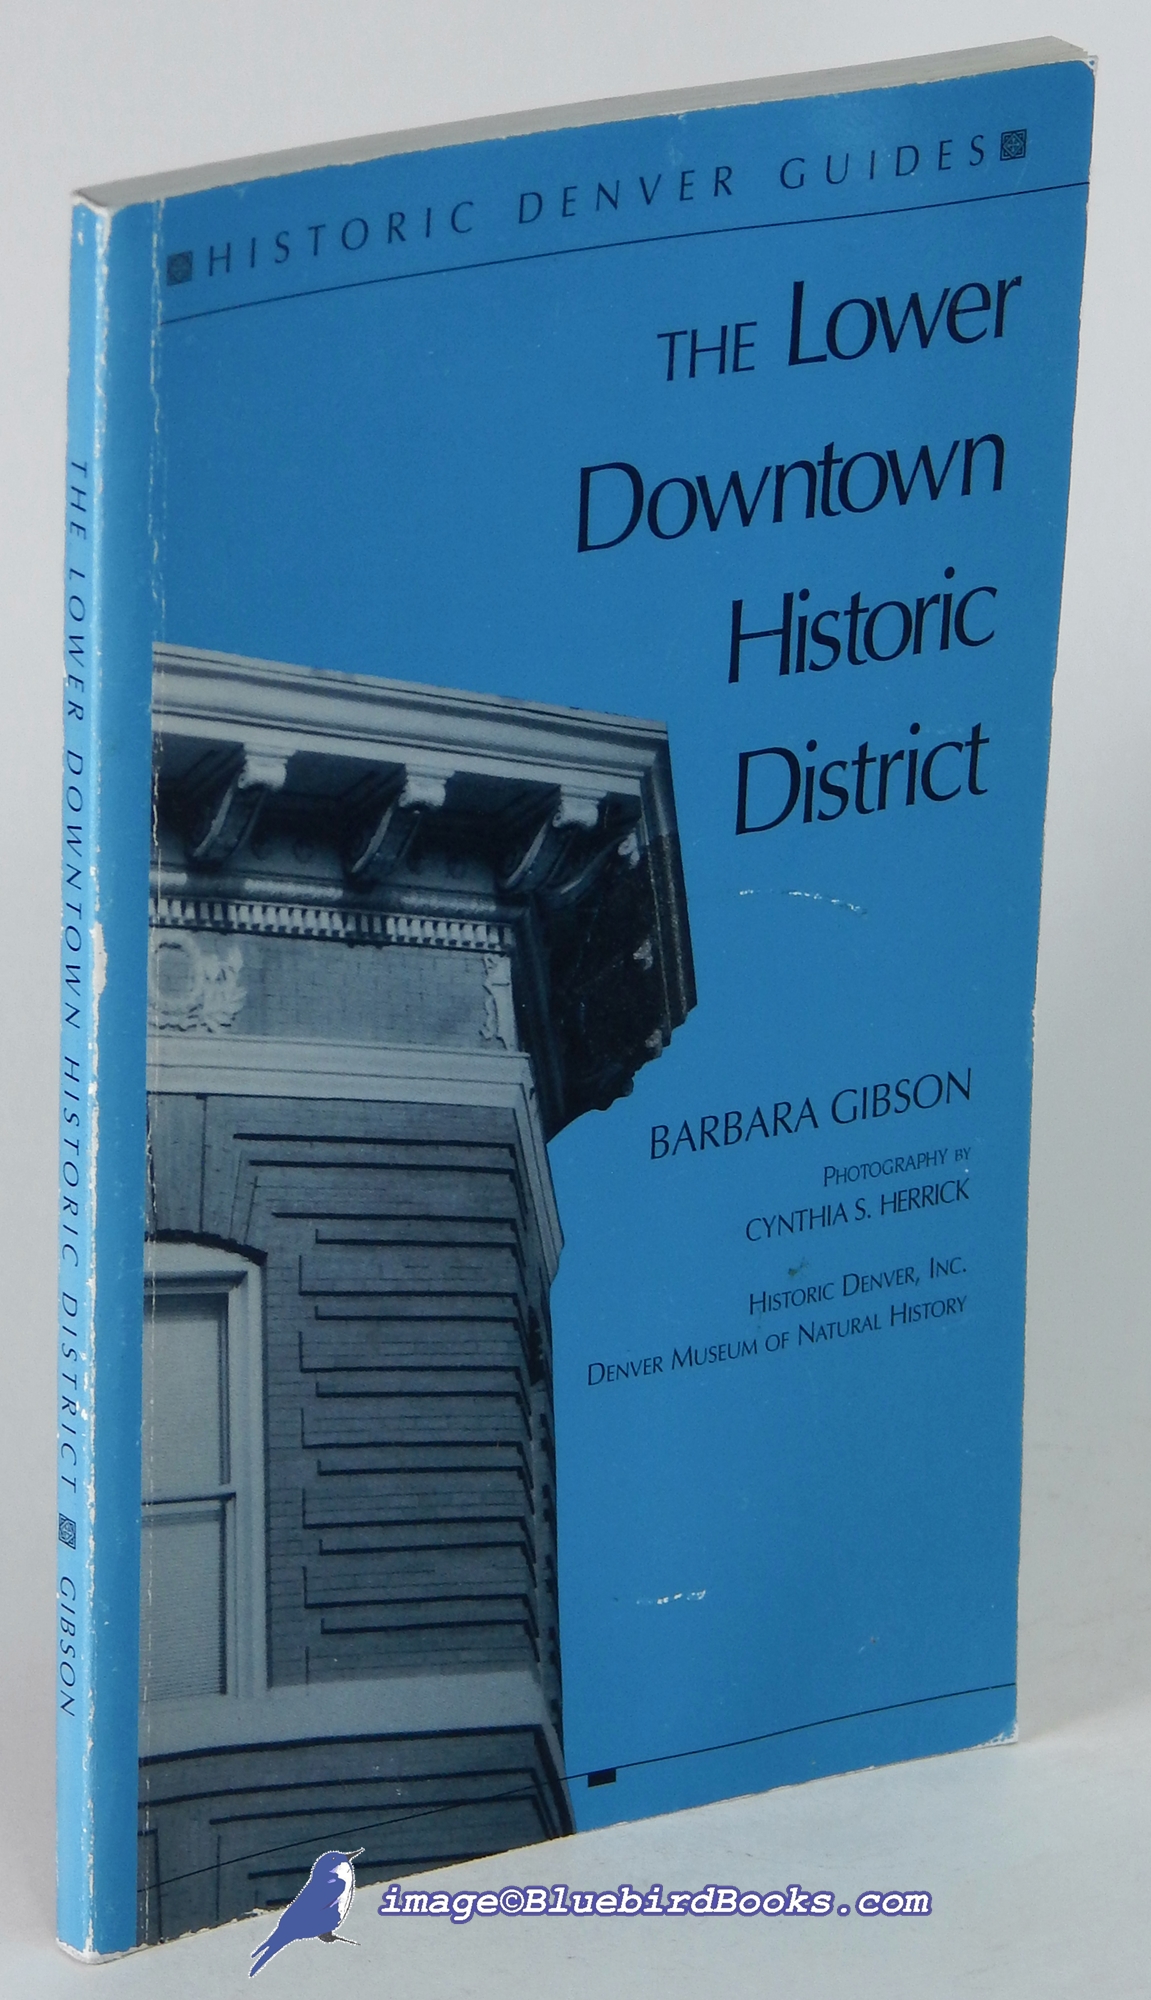 GIBSON, BARBARA - The Lower Downtown Historic District (Historic Denver Guides)